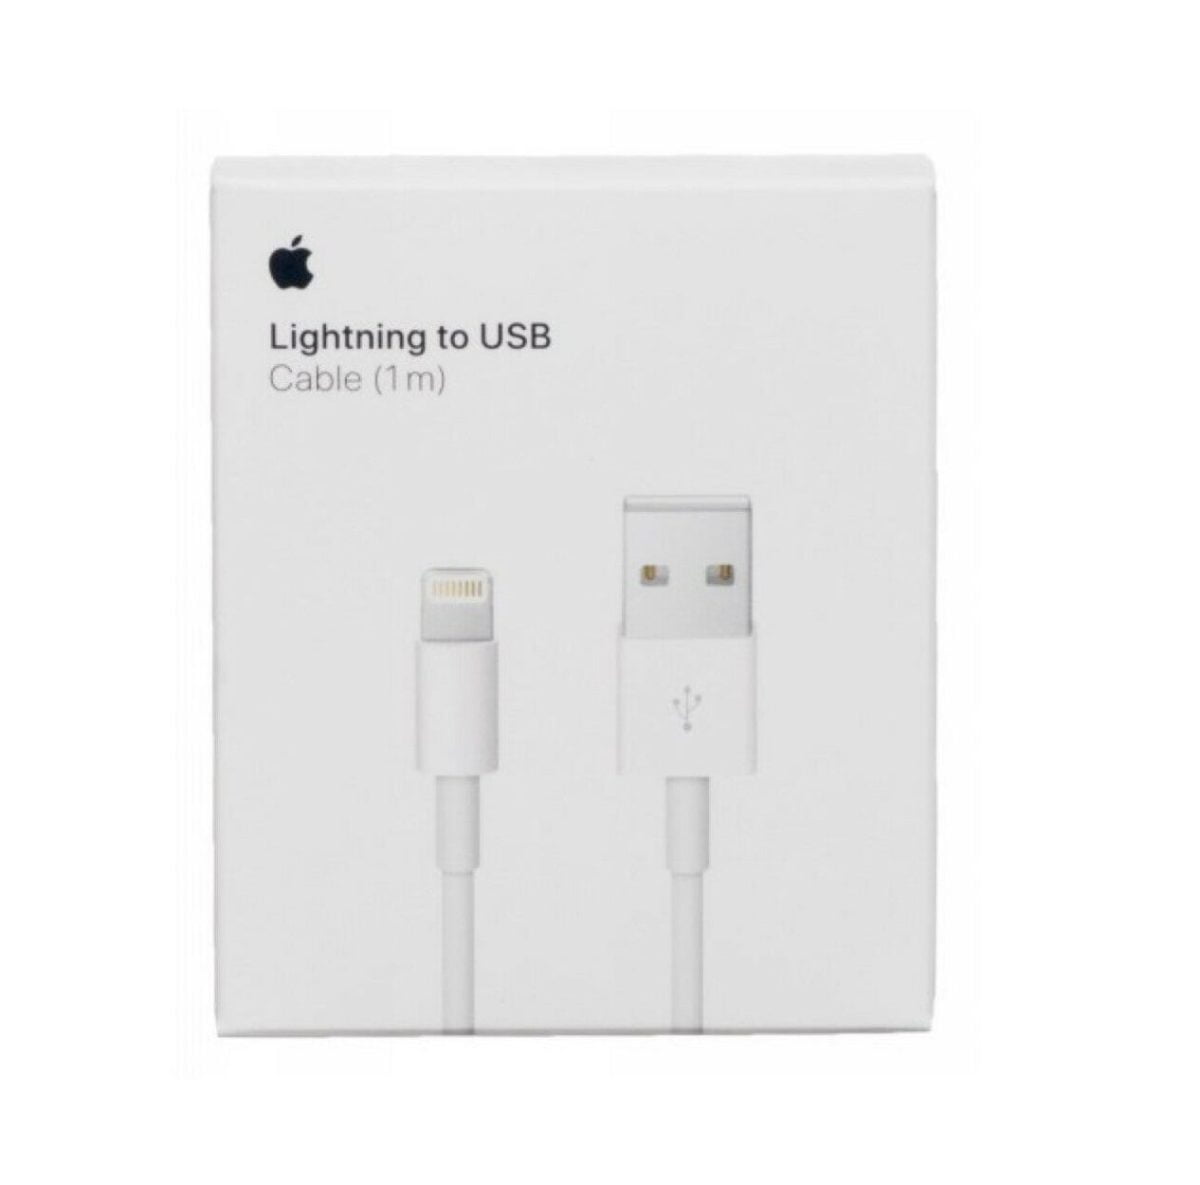 S L1600 3 Apple Cable/Cord Length: 1 Meter Connectivity: Apple Lightning Connector, Usb Cable Application: Apple Ipod, Apple Iphone, Apple Ipad Connection Gender: Male-To-Male Original Apple Product Apple Lightning To Usb Cable (1M) (Mque2Am/A) Apple Lightning To Usb Cable (1M) (Mque2Am/A)